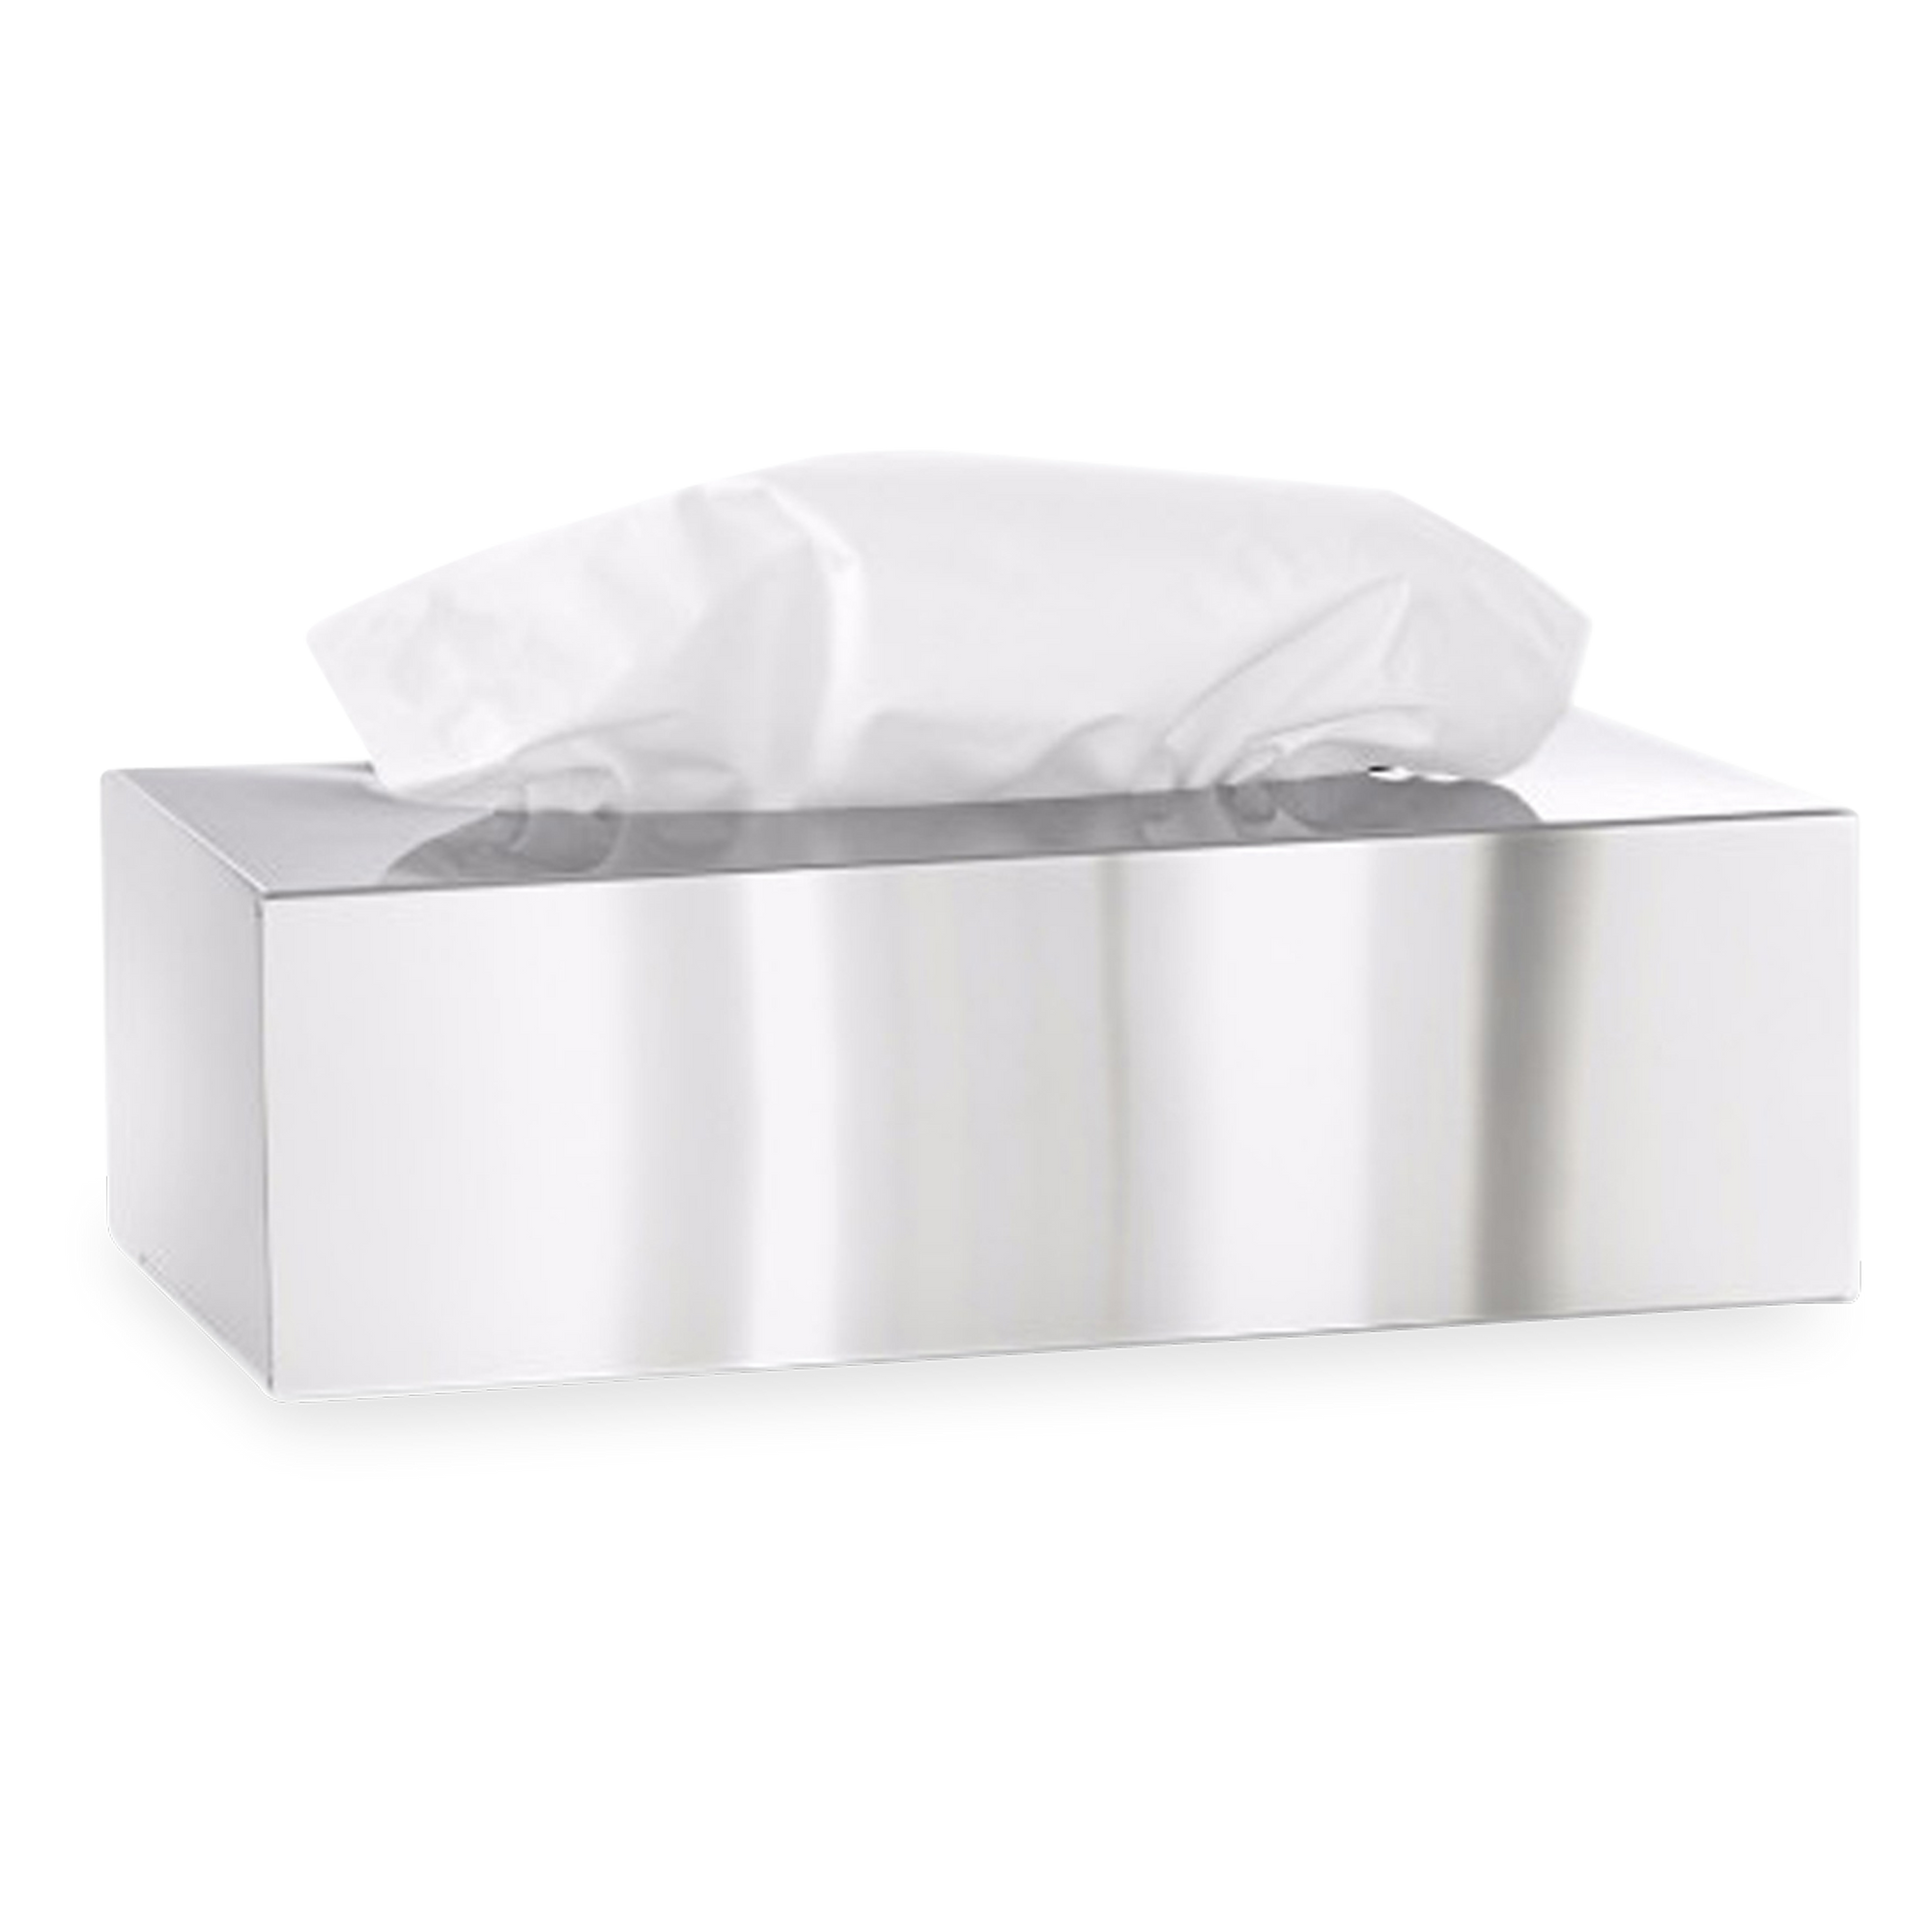 The Nexio Tissue Holder is designed to hold tissues only (not tissue box).